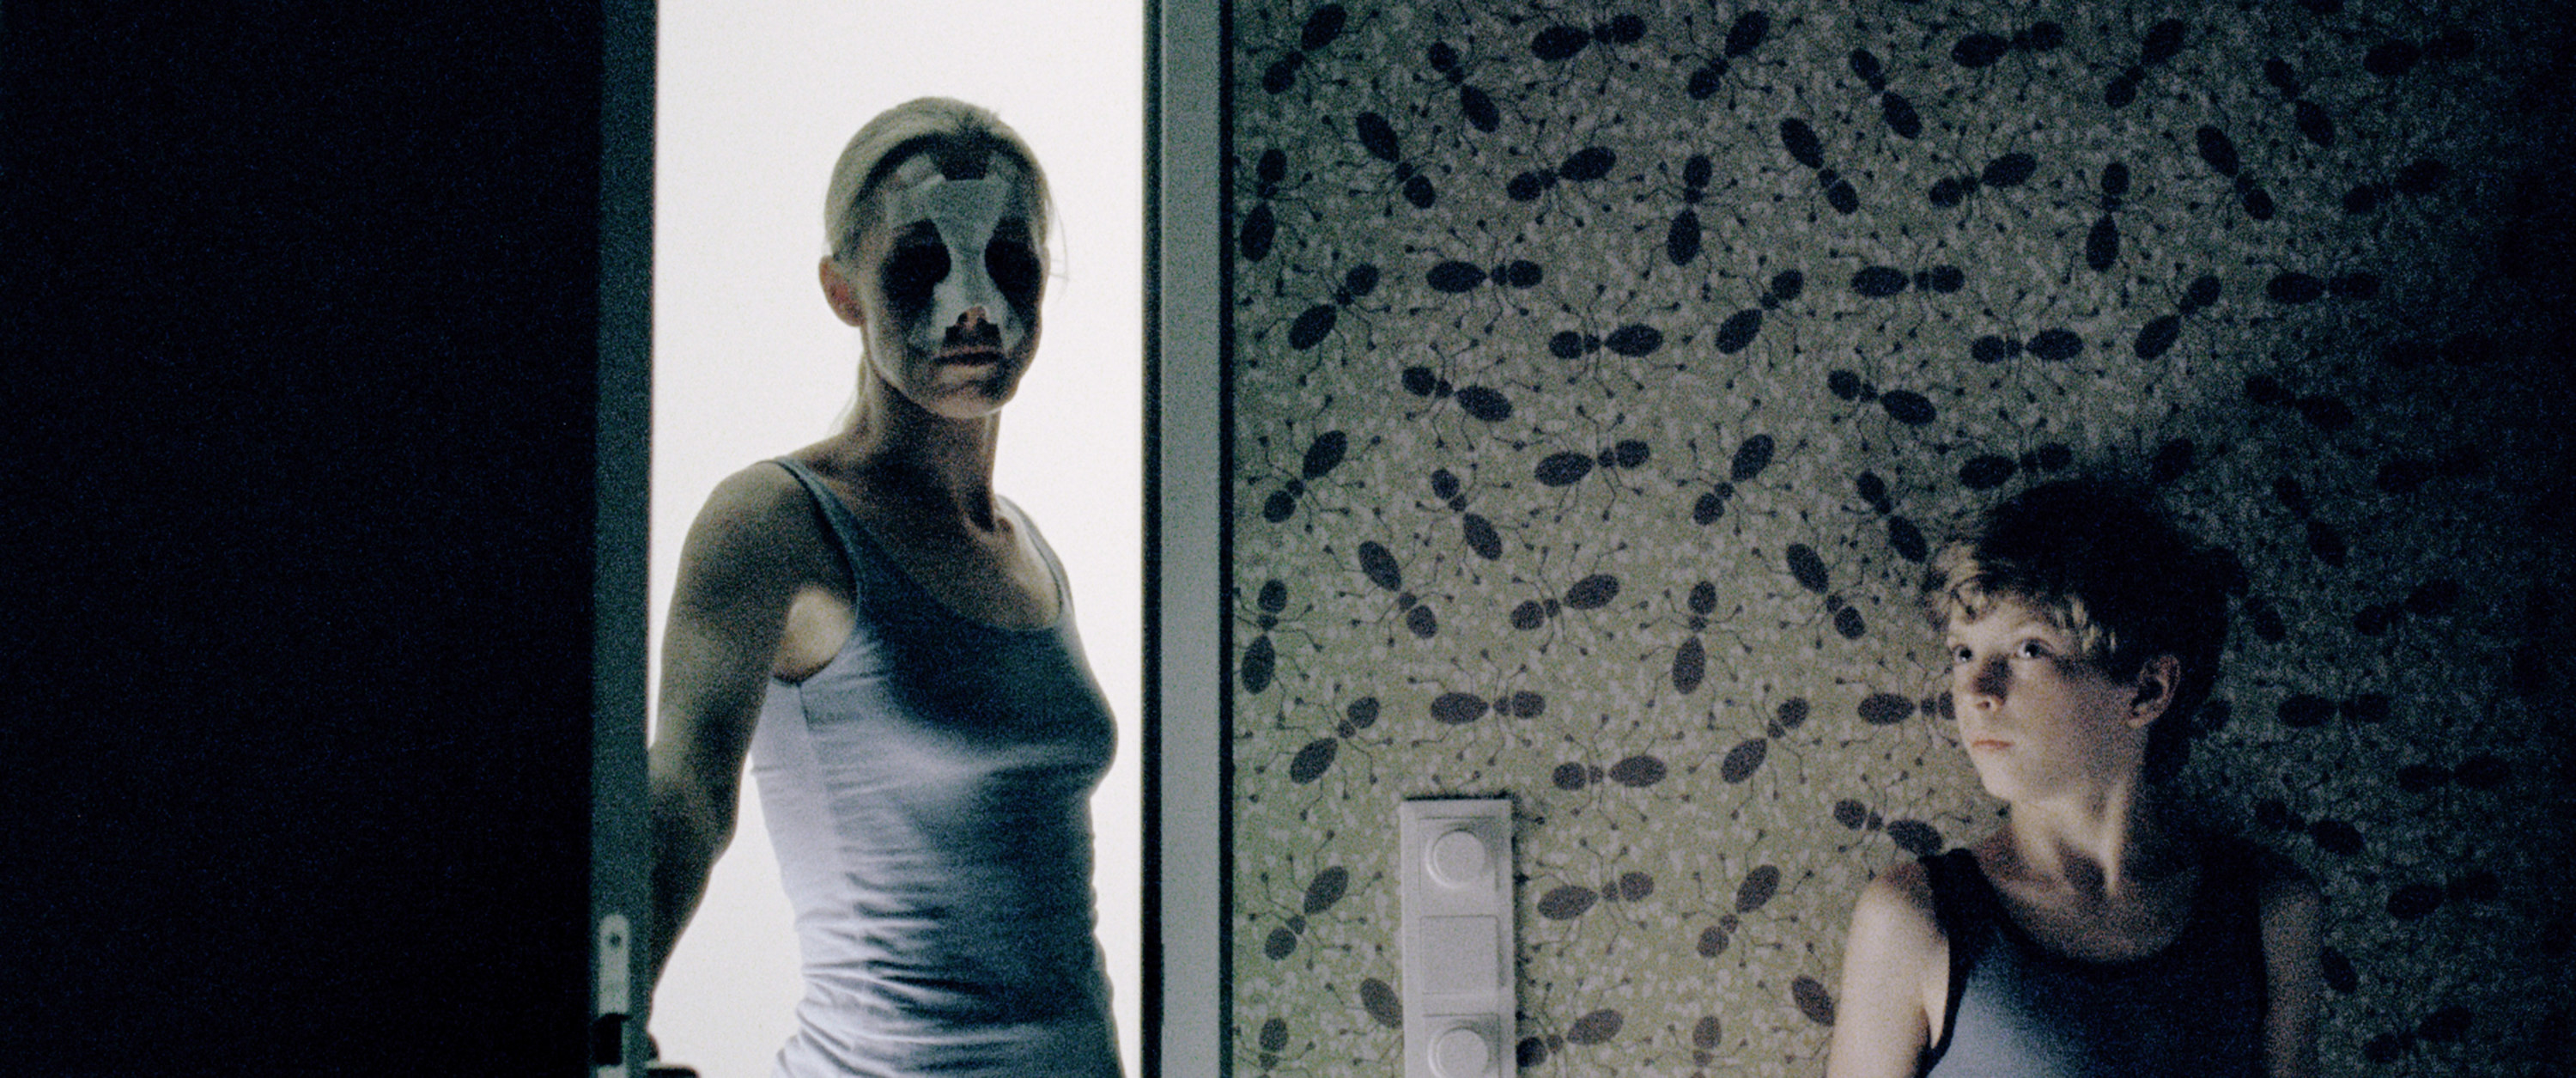 A woman in a mask enters a room while a young boy hides